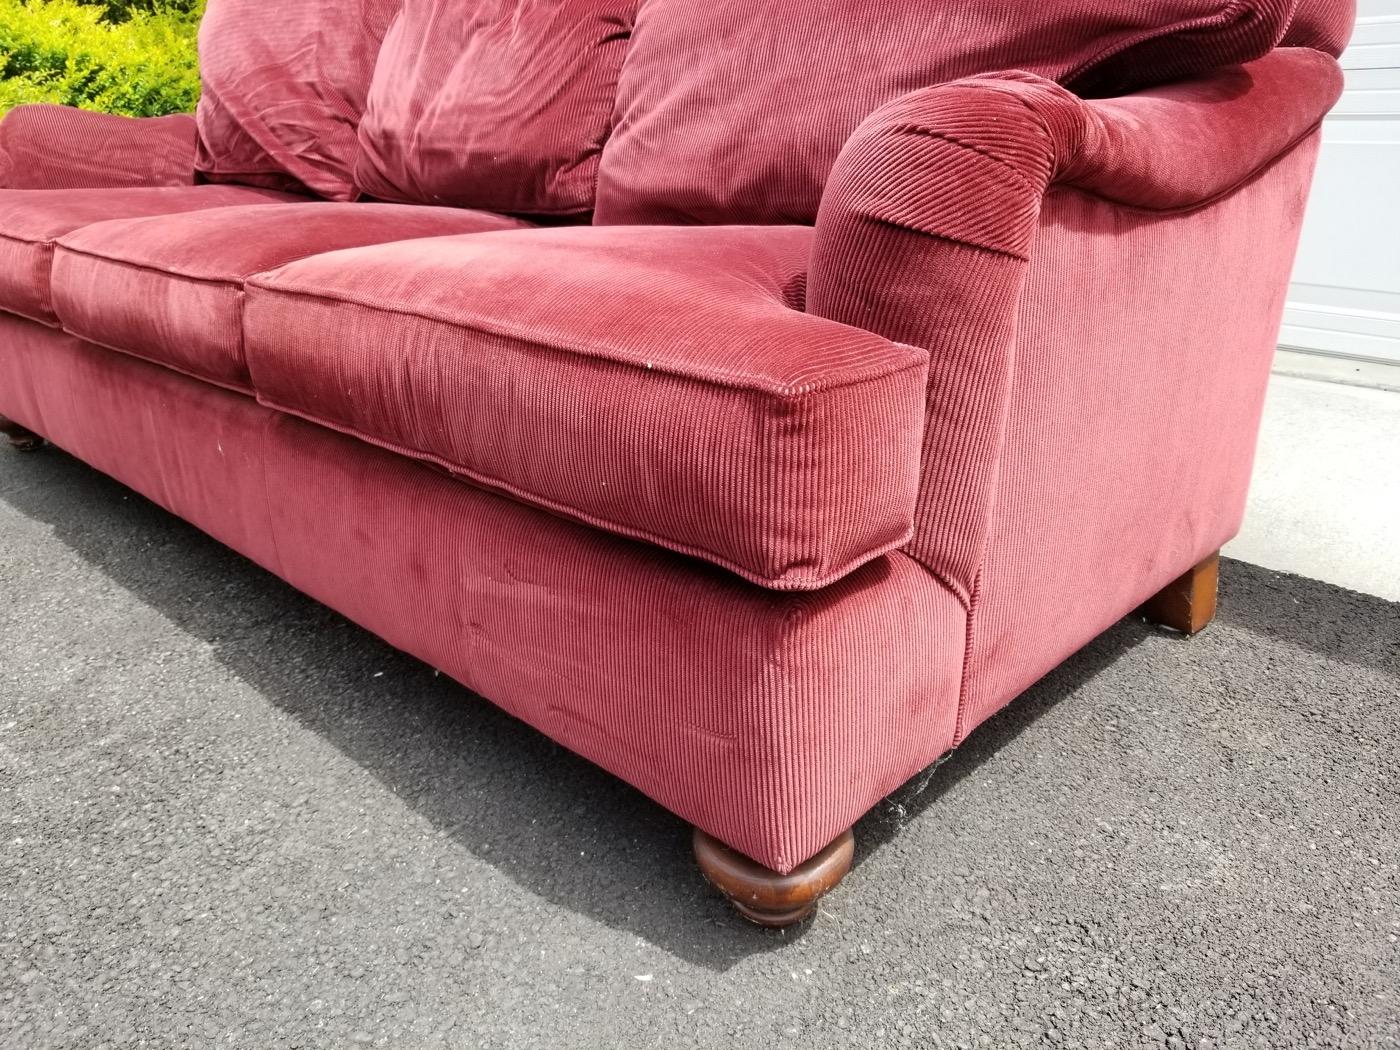 pink corduroy couch